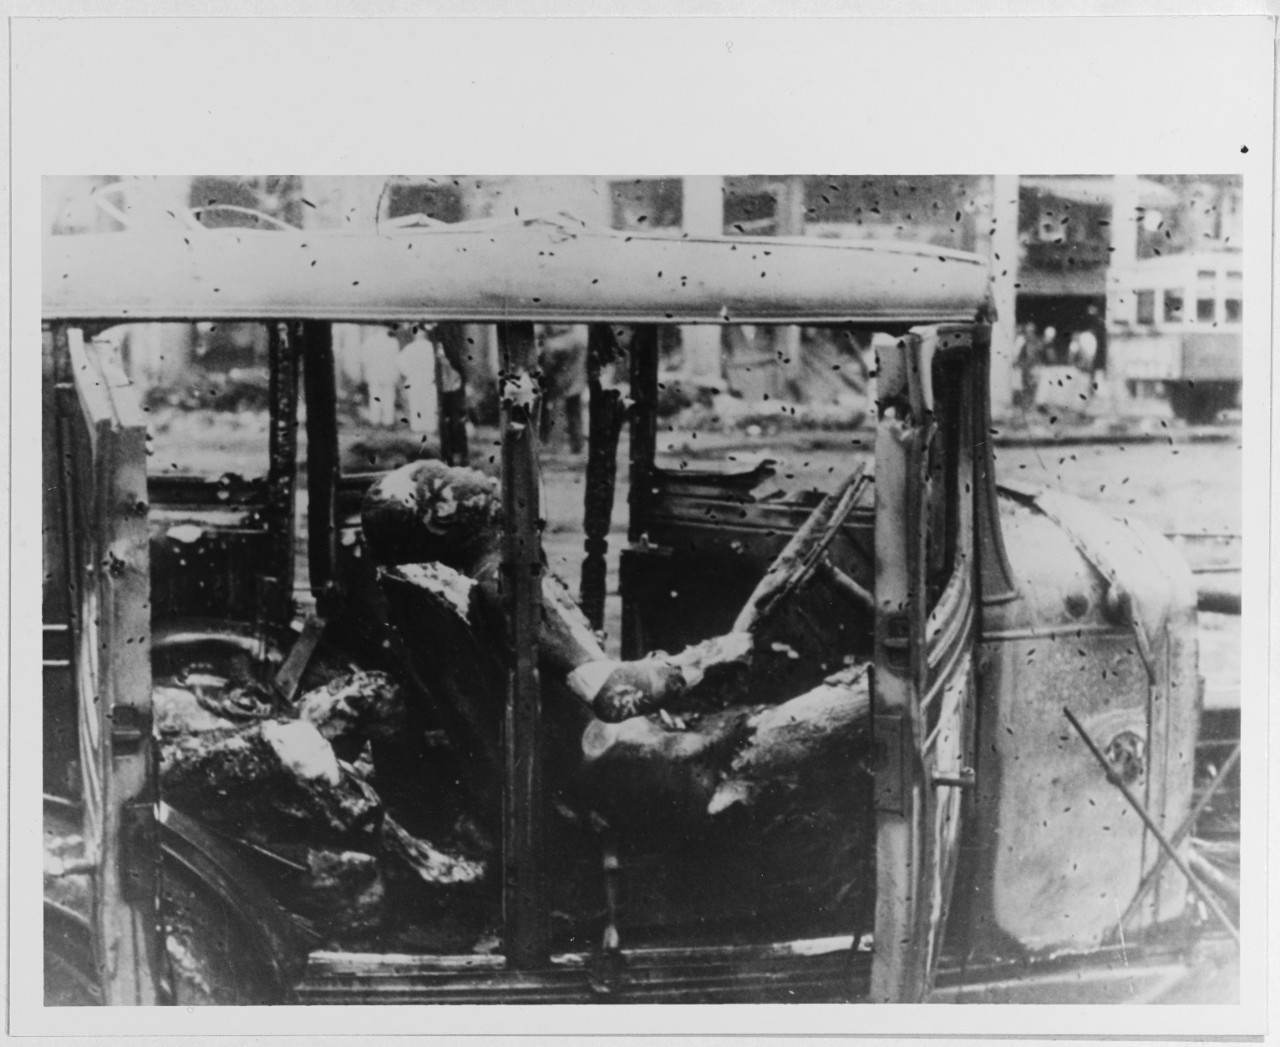 Devastation after accidental bombing, in the International Settlement, Shanghai, China. 